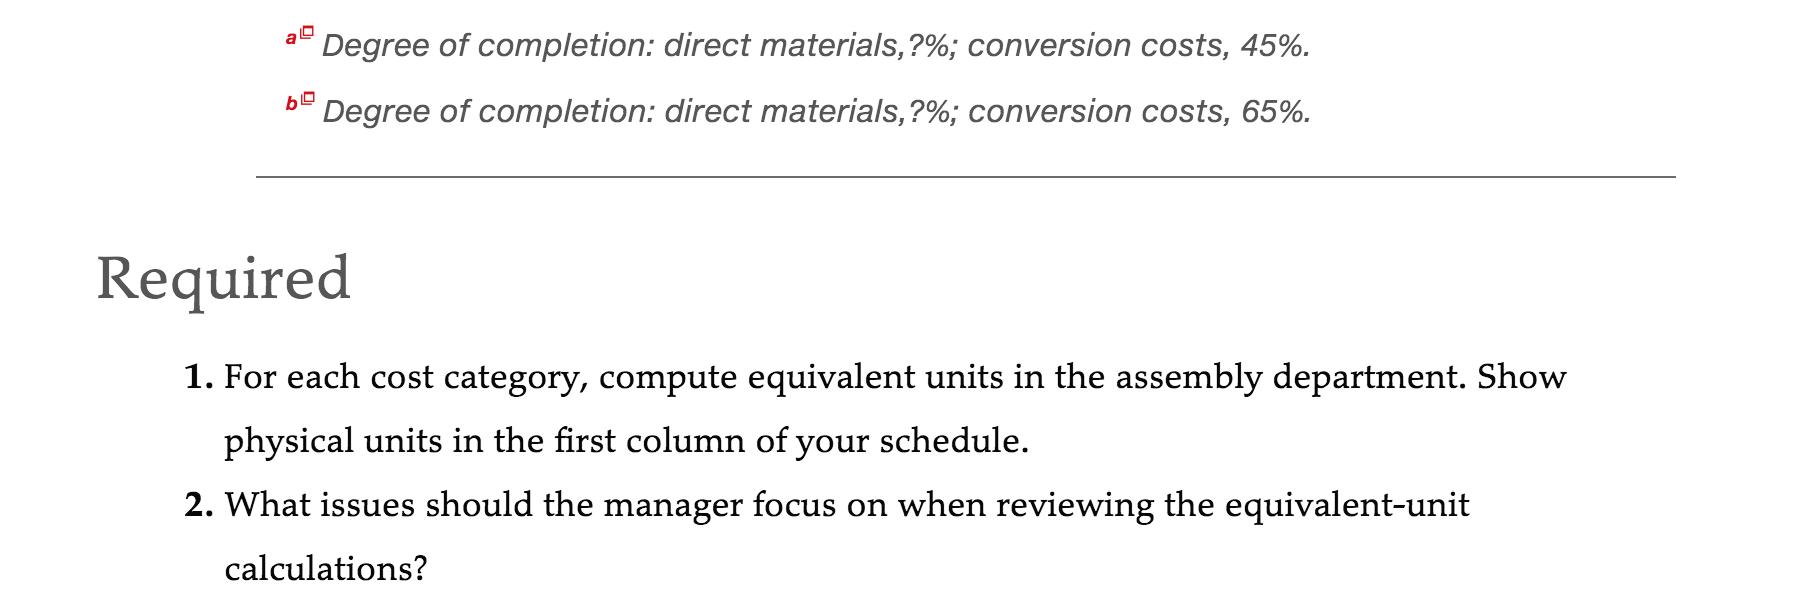 a Degree of completion: direct materials, ?%; conversion costs, 45%. b Degree of completion: direct materials, ?%; conversion